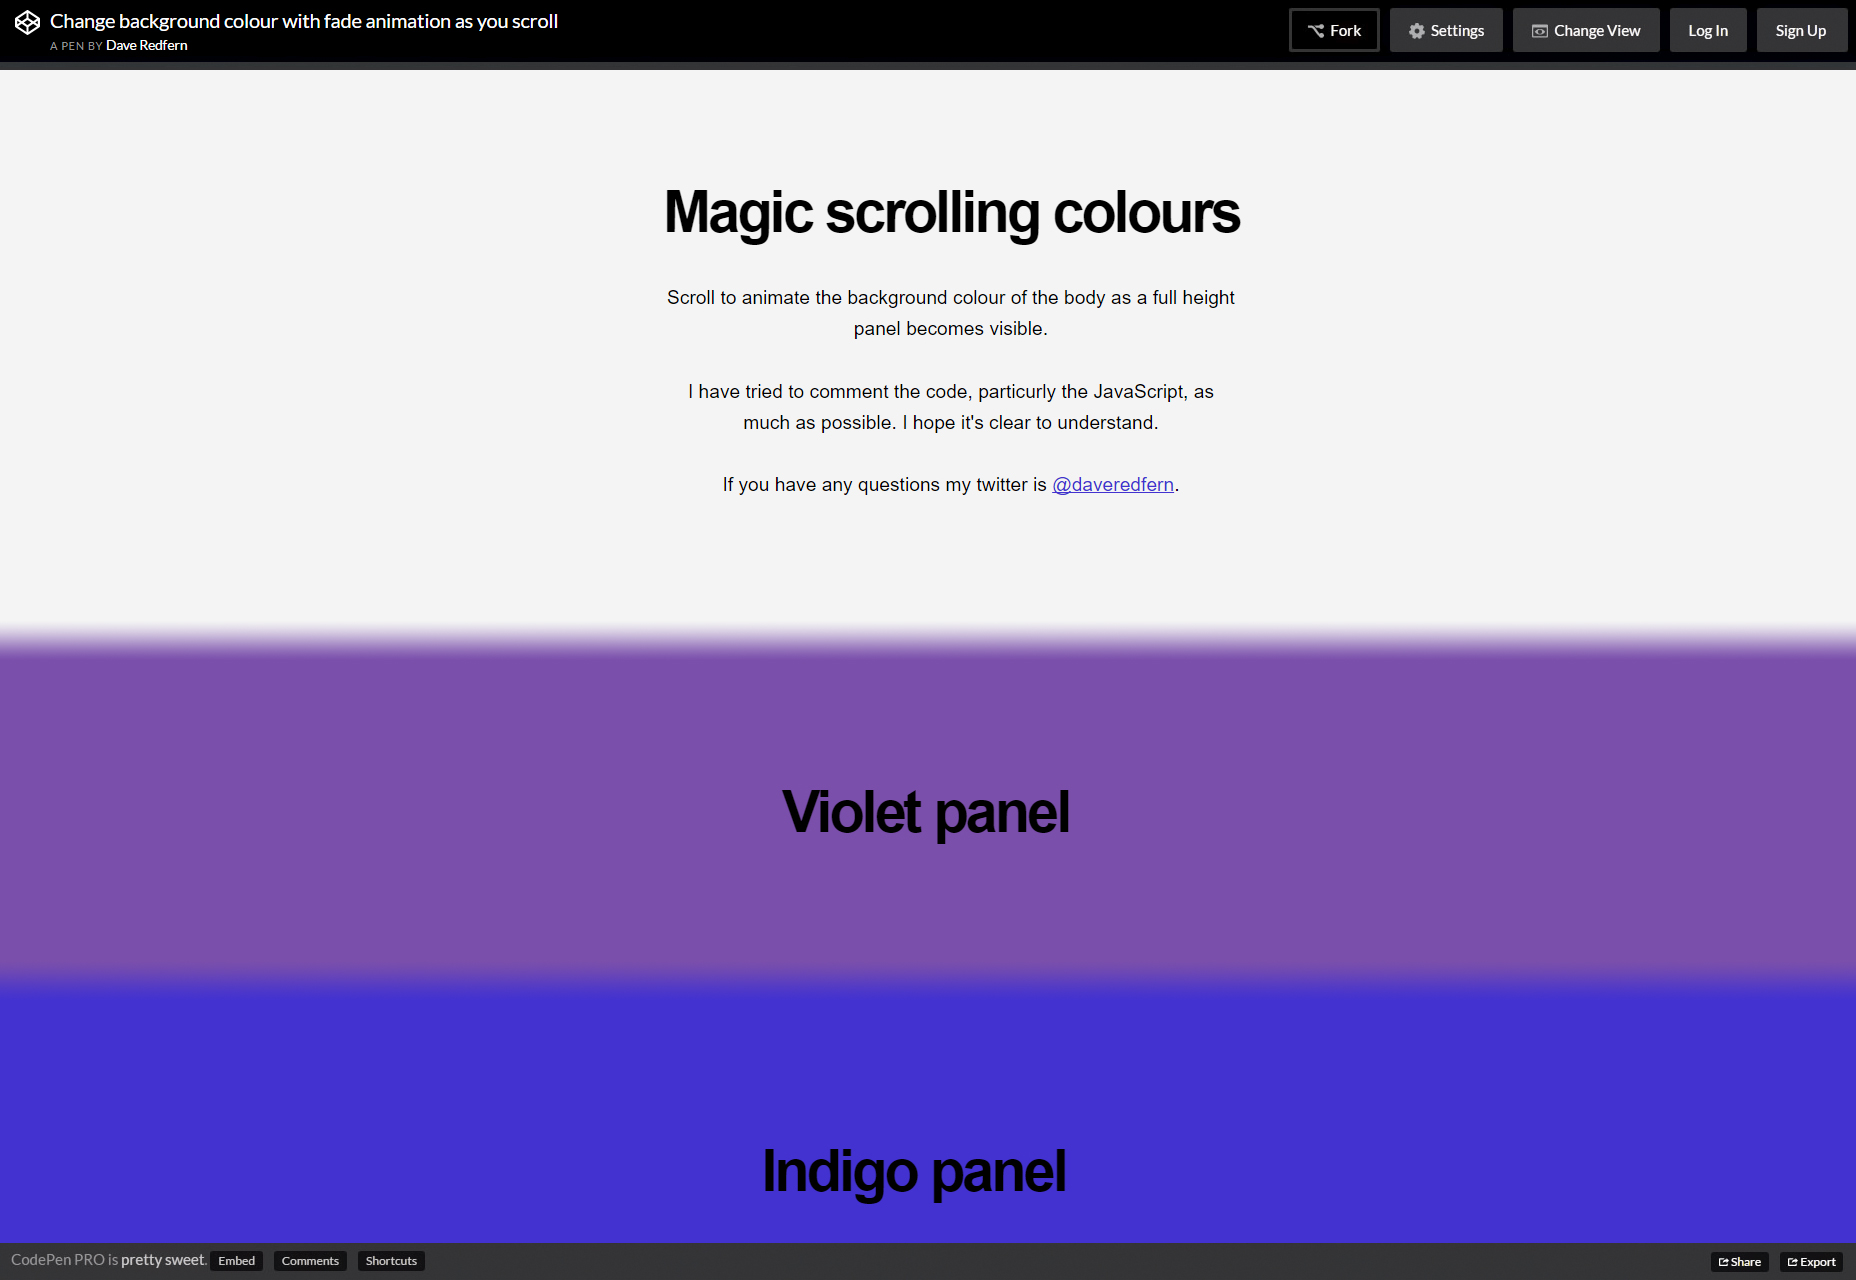 fade-background-color-animation-as-you-scroll